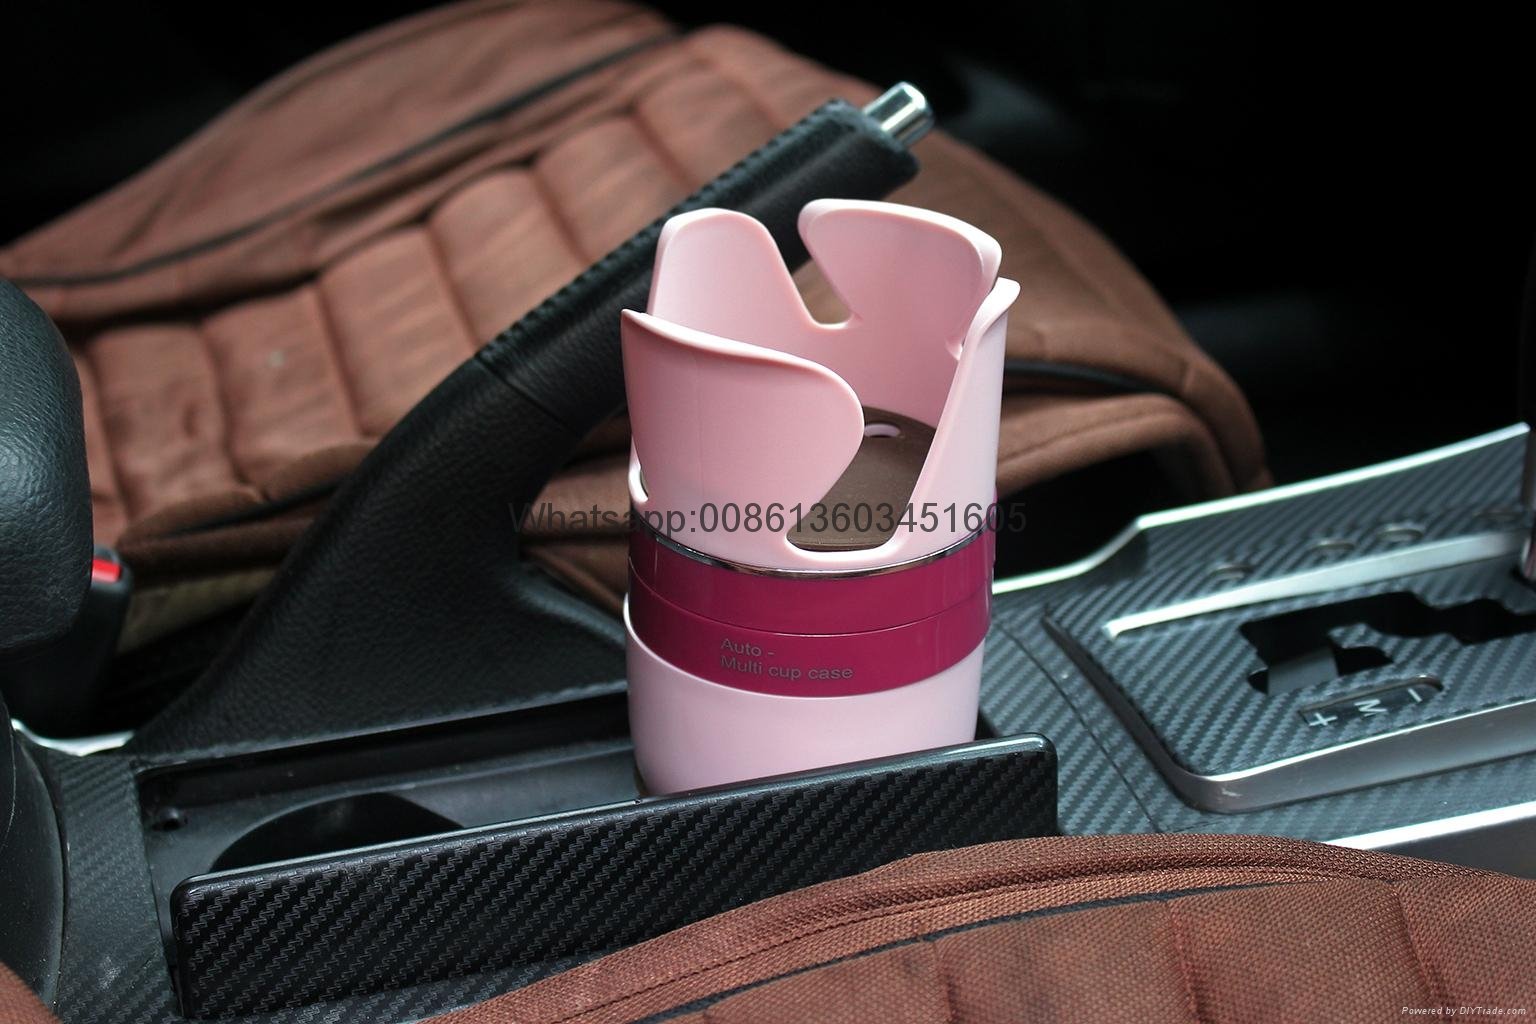 New Styling ABS Car holder Frame Drink Cup Vehicle-Mounted Drinks Beverage Holde